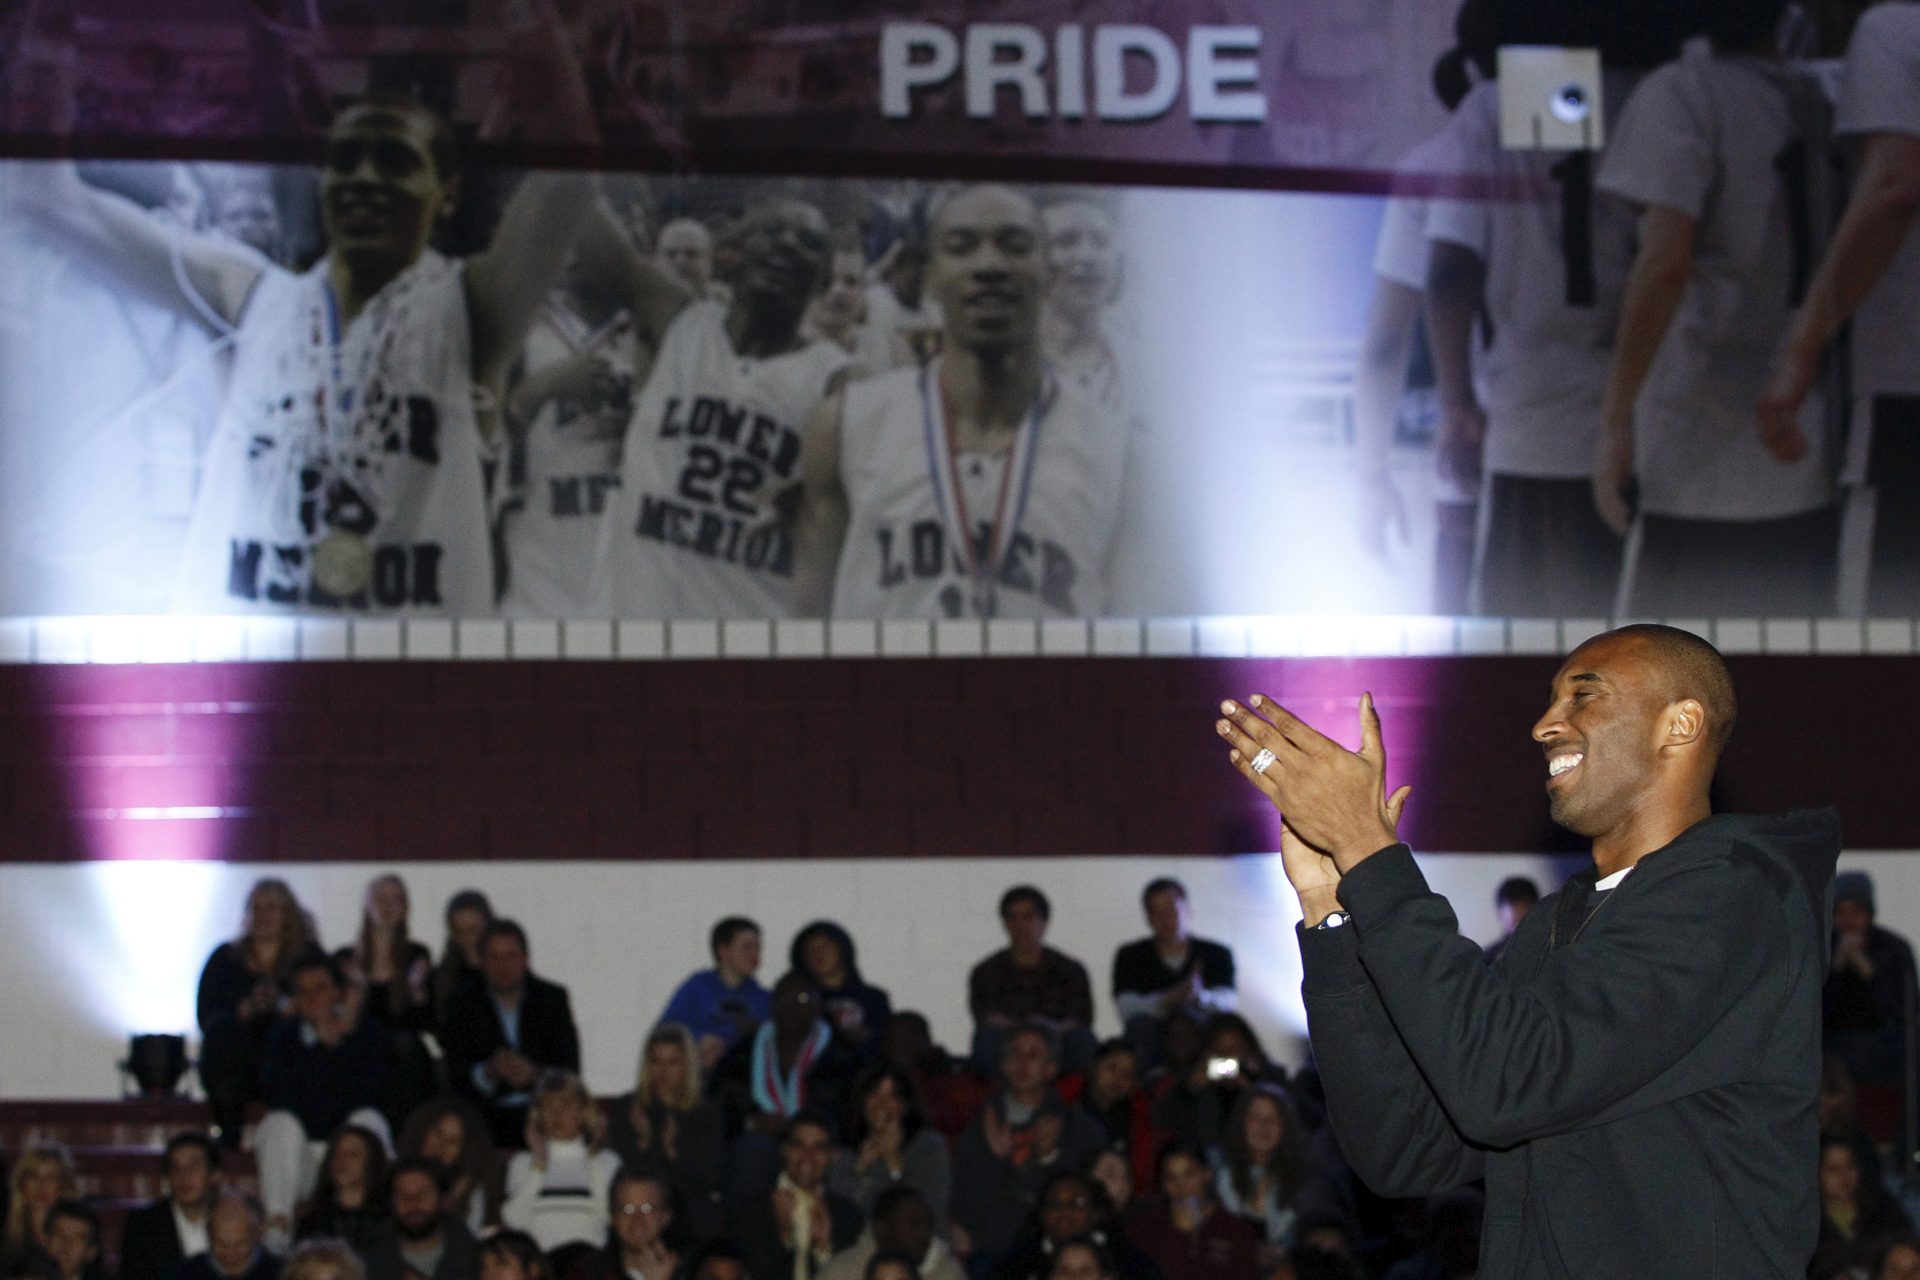 Los Angles Lakers basketball player Kobe Bryant during a dedication ceremony for a new gymnasium at Lower Merion High School, Thursday, Dec. 16, 2010, in Ardmore, Pa. The gym was named and dedicated to Bryant, a Lower Merion alumnus.